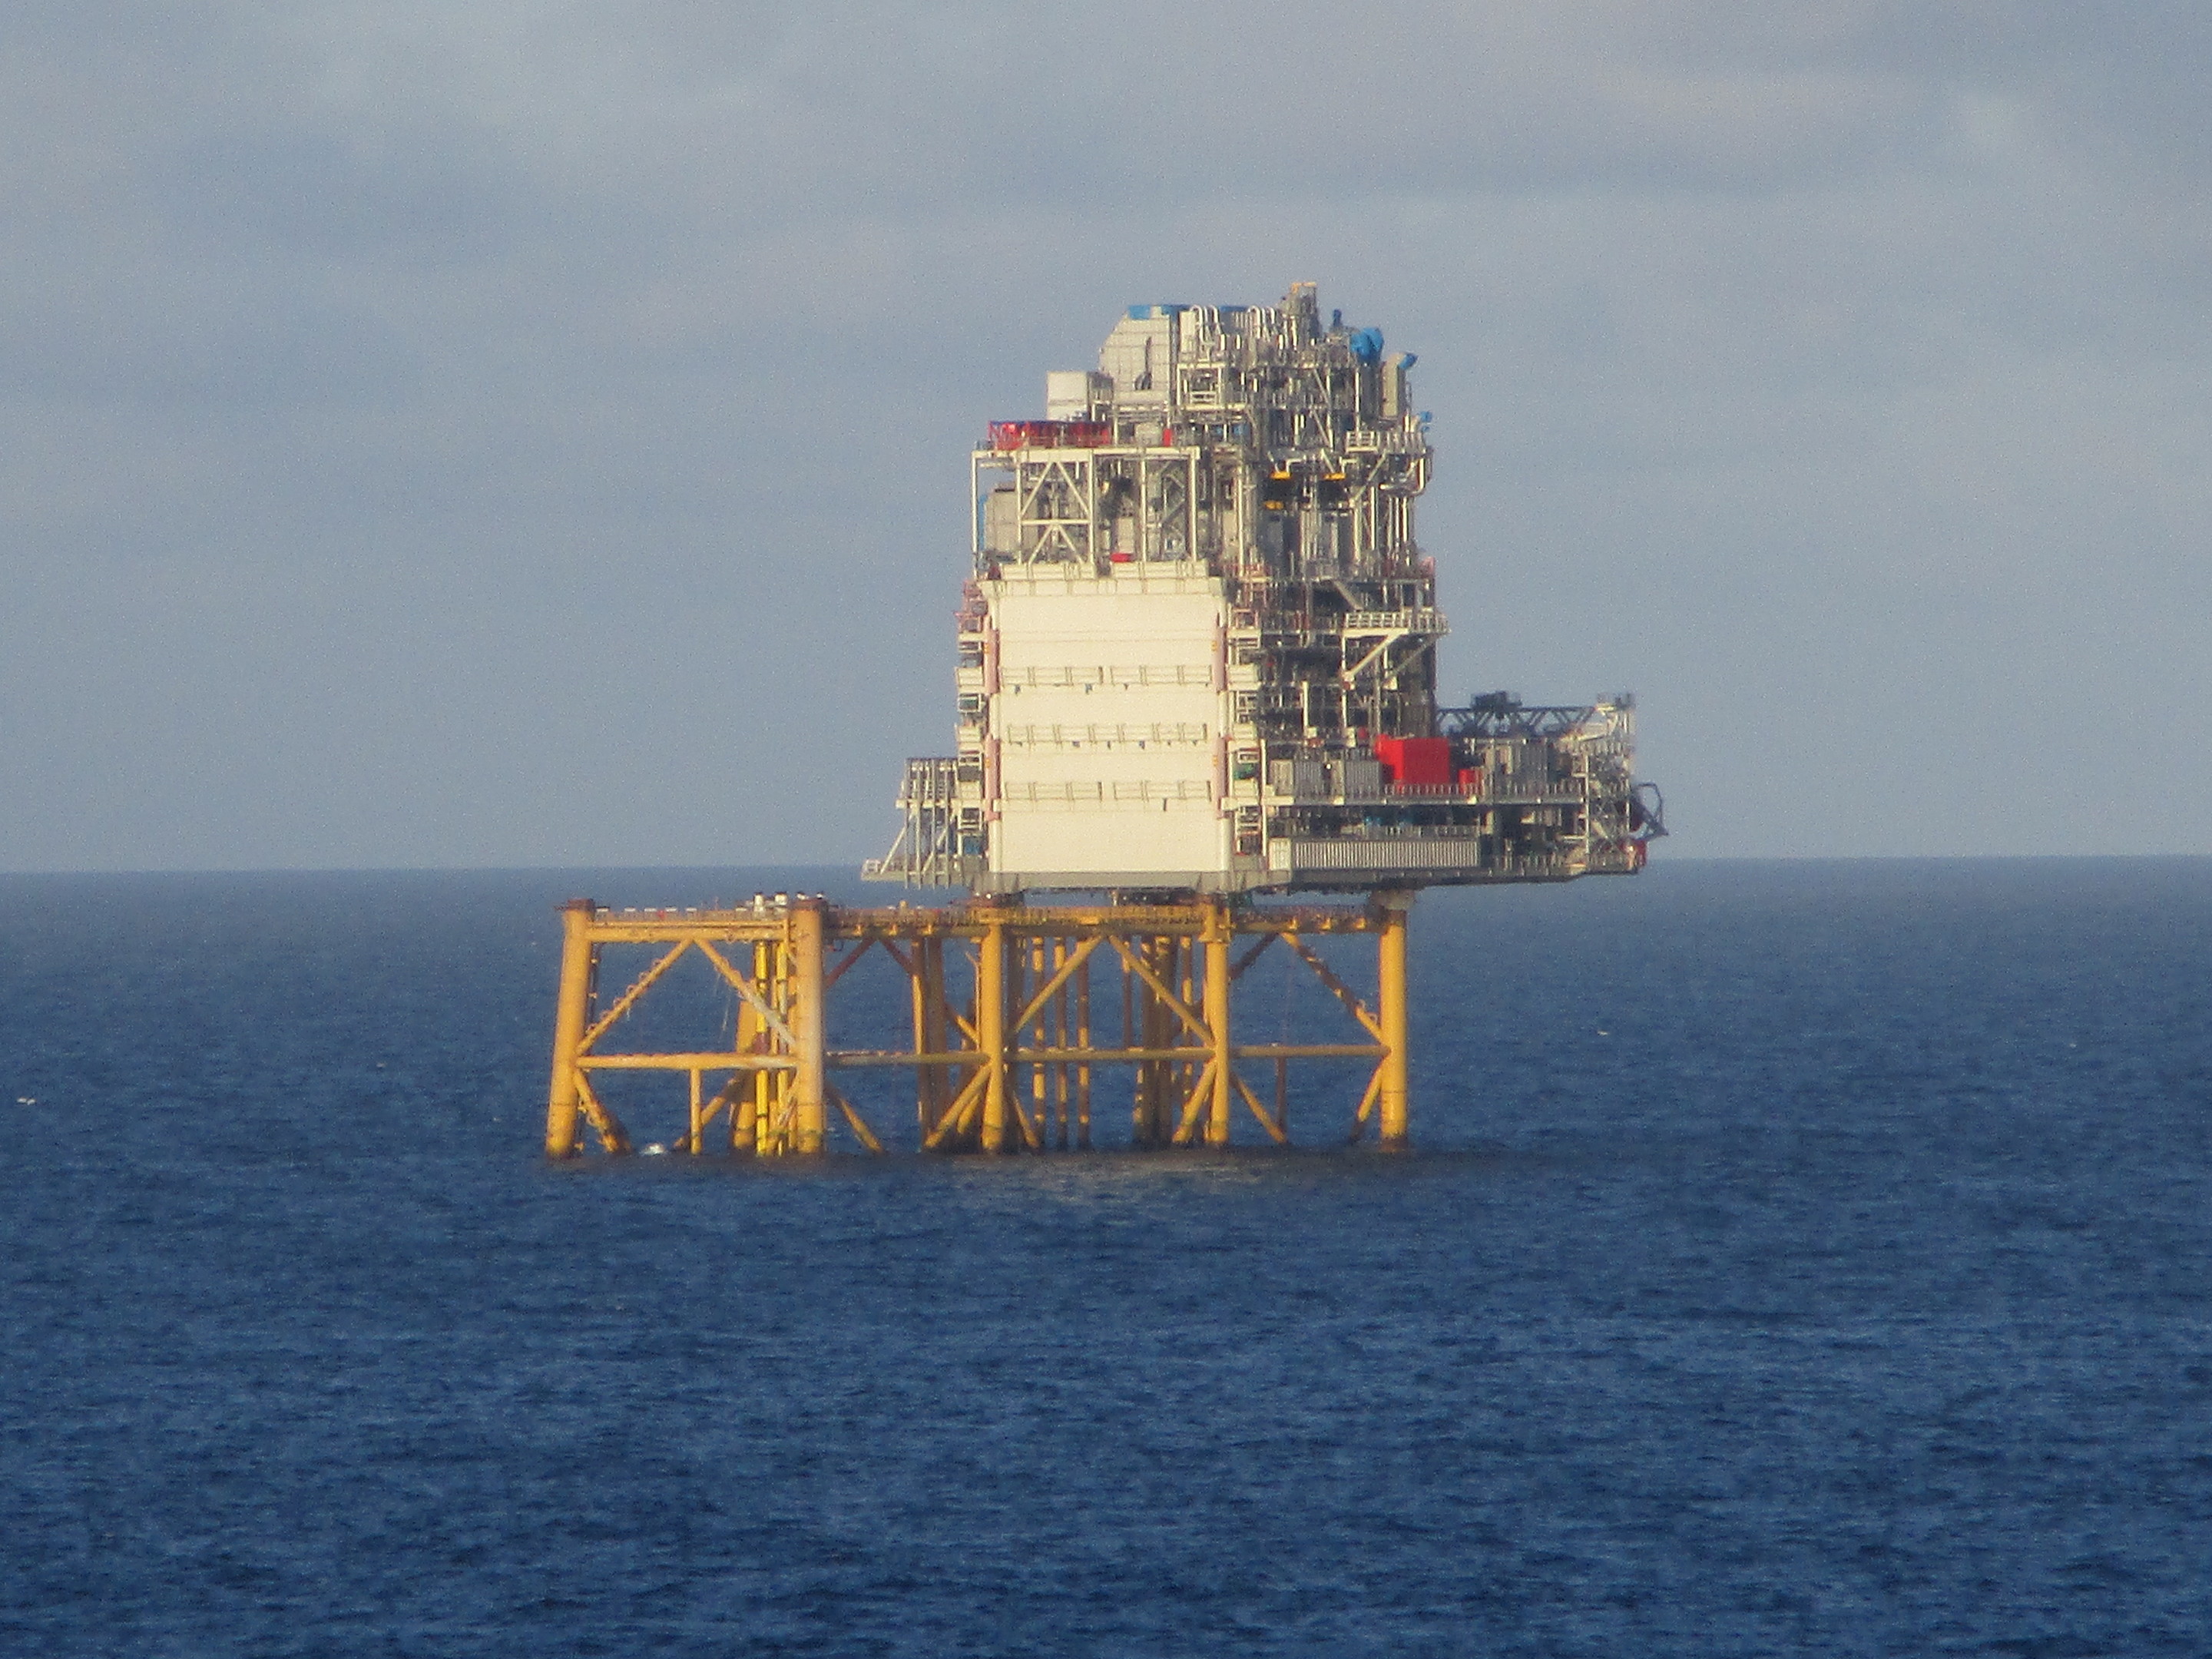 The utility module on top of Mariner jacket. Seen from the Mariner B Floating Storage Unit. Photo by Statoil.